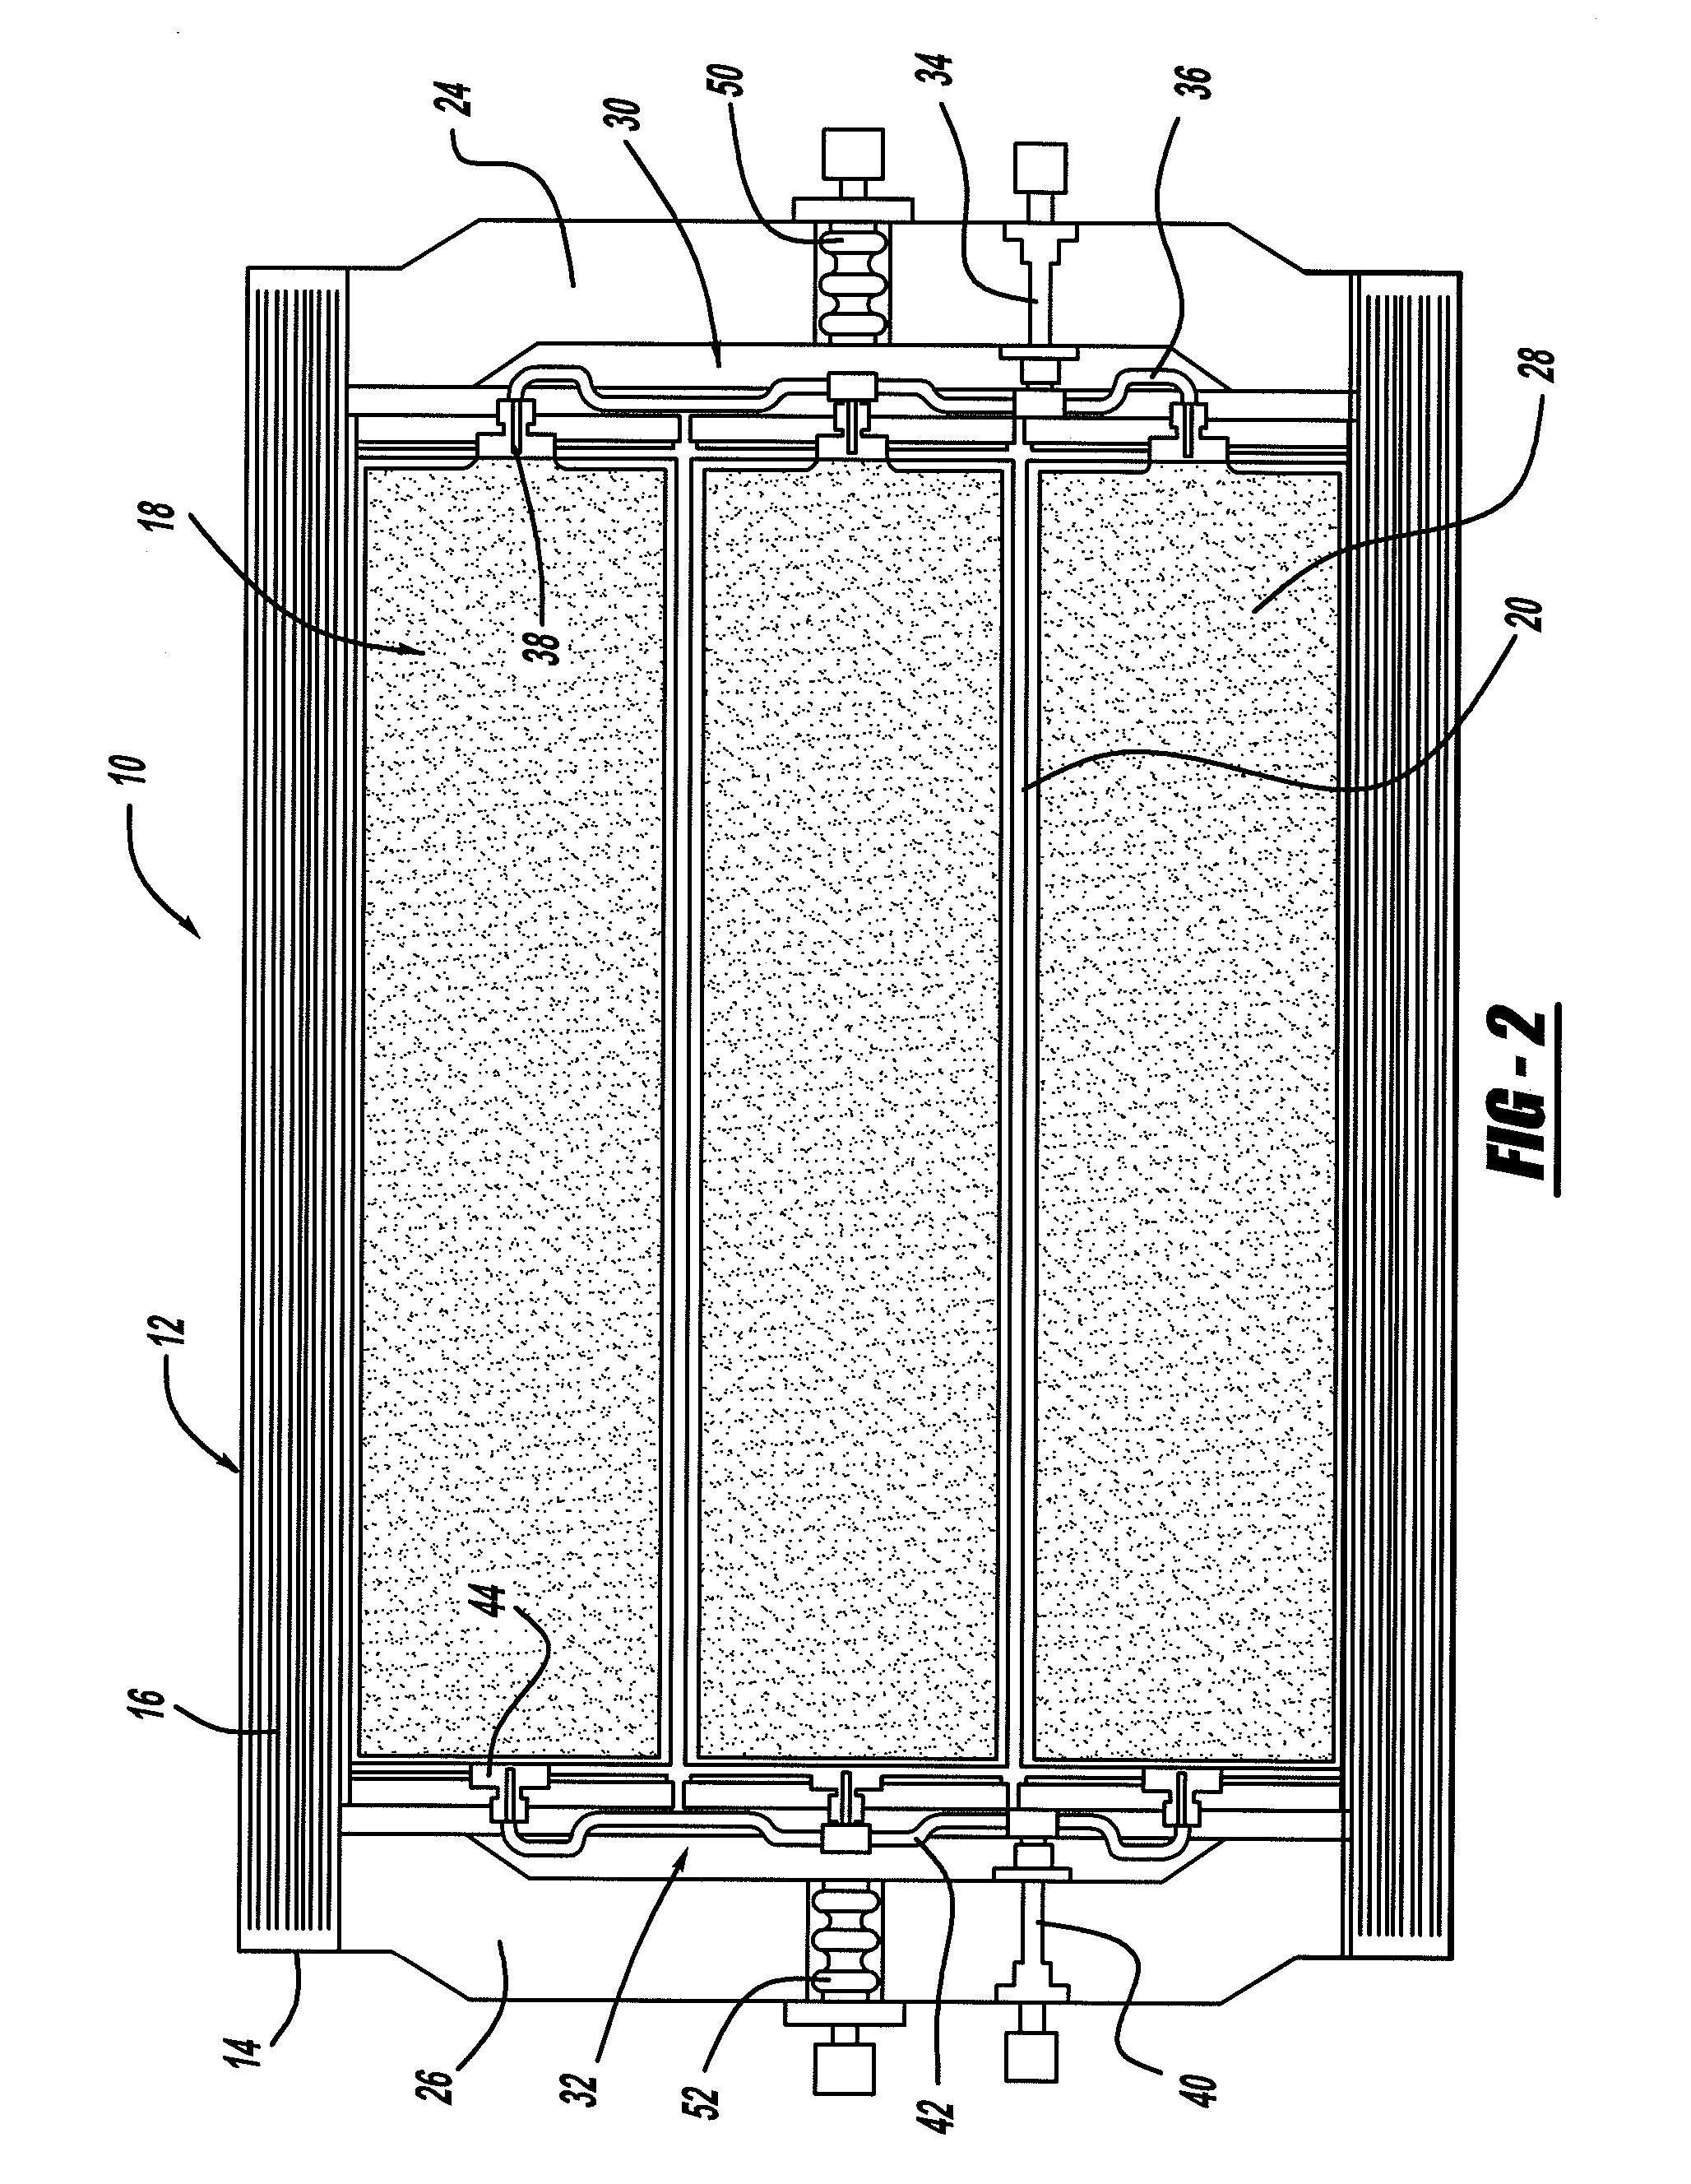 Hydrogen Storage Tank System Based on Gas Adsorption on High-Surface Materials Comprising an Integrated Heat Exchanger